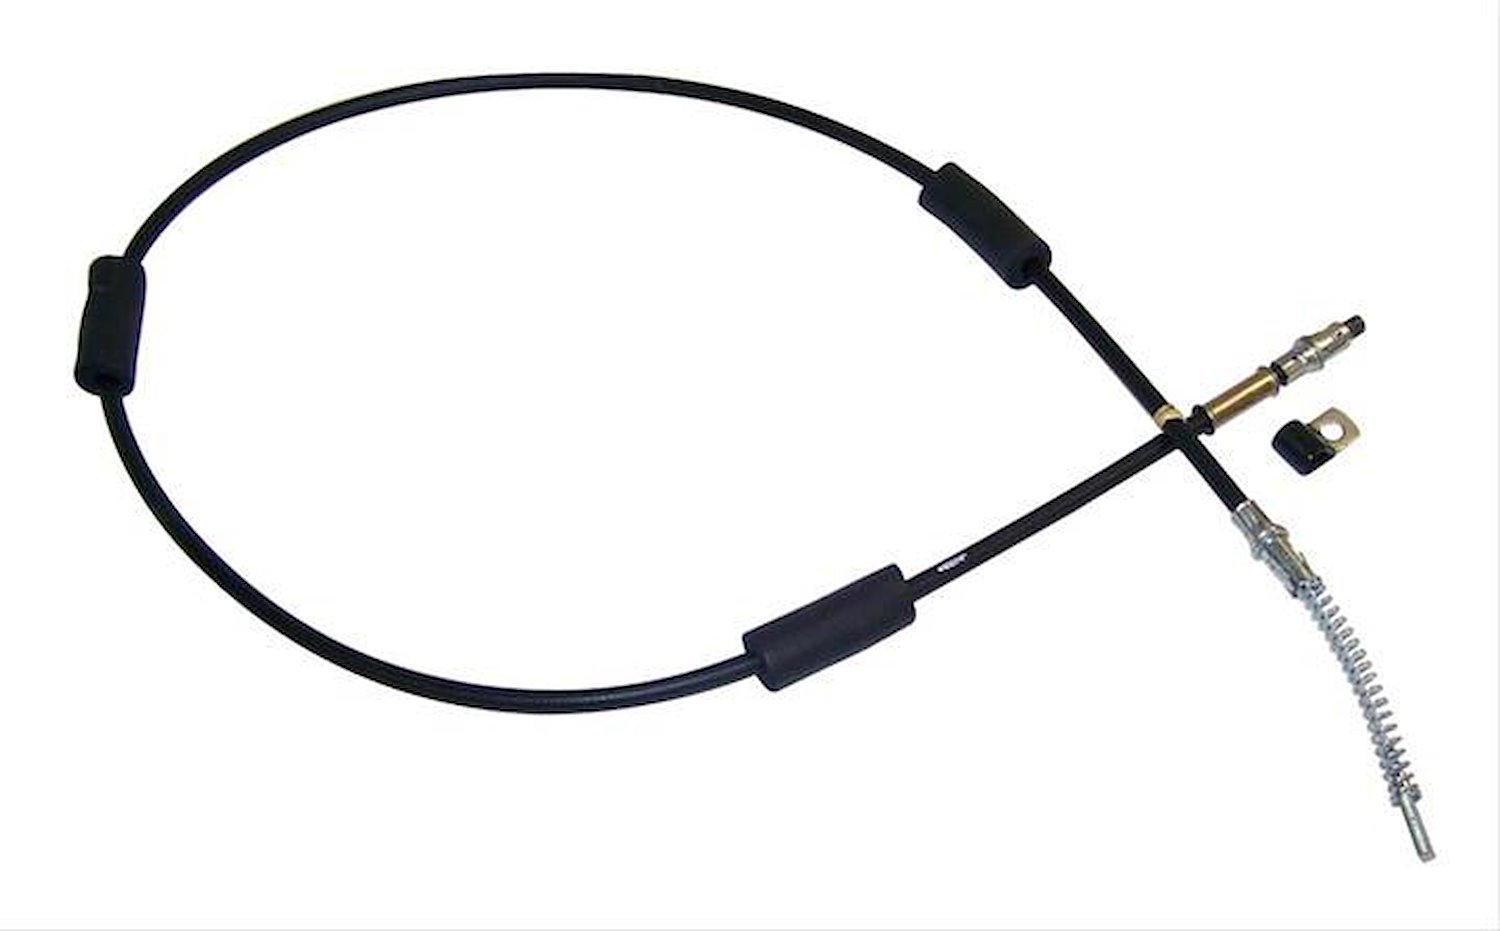 RT31019 Right Rear Parking Brake Cable for 1987-1990 Jeep YJ Wrangler w/ Rear Disc Conversion; 64.75" Long